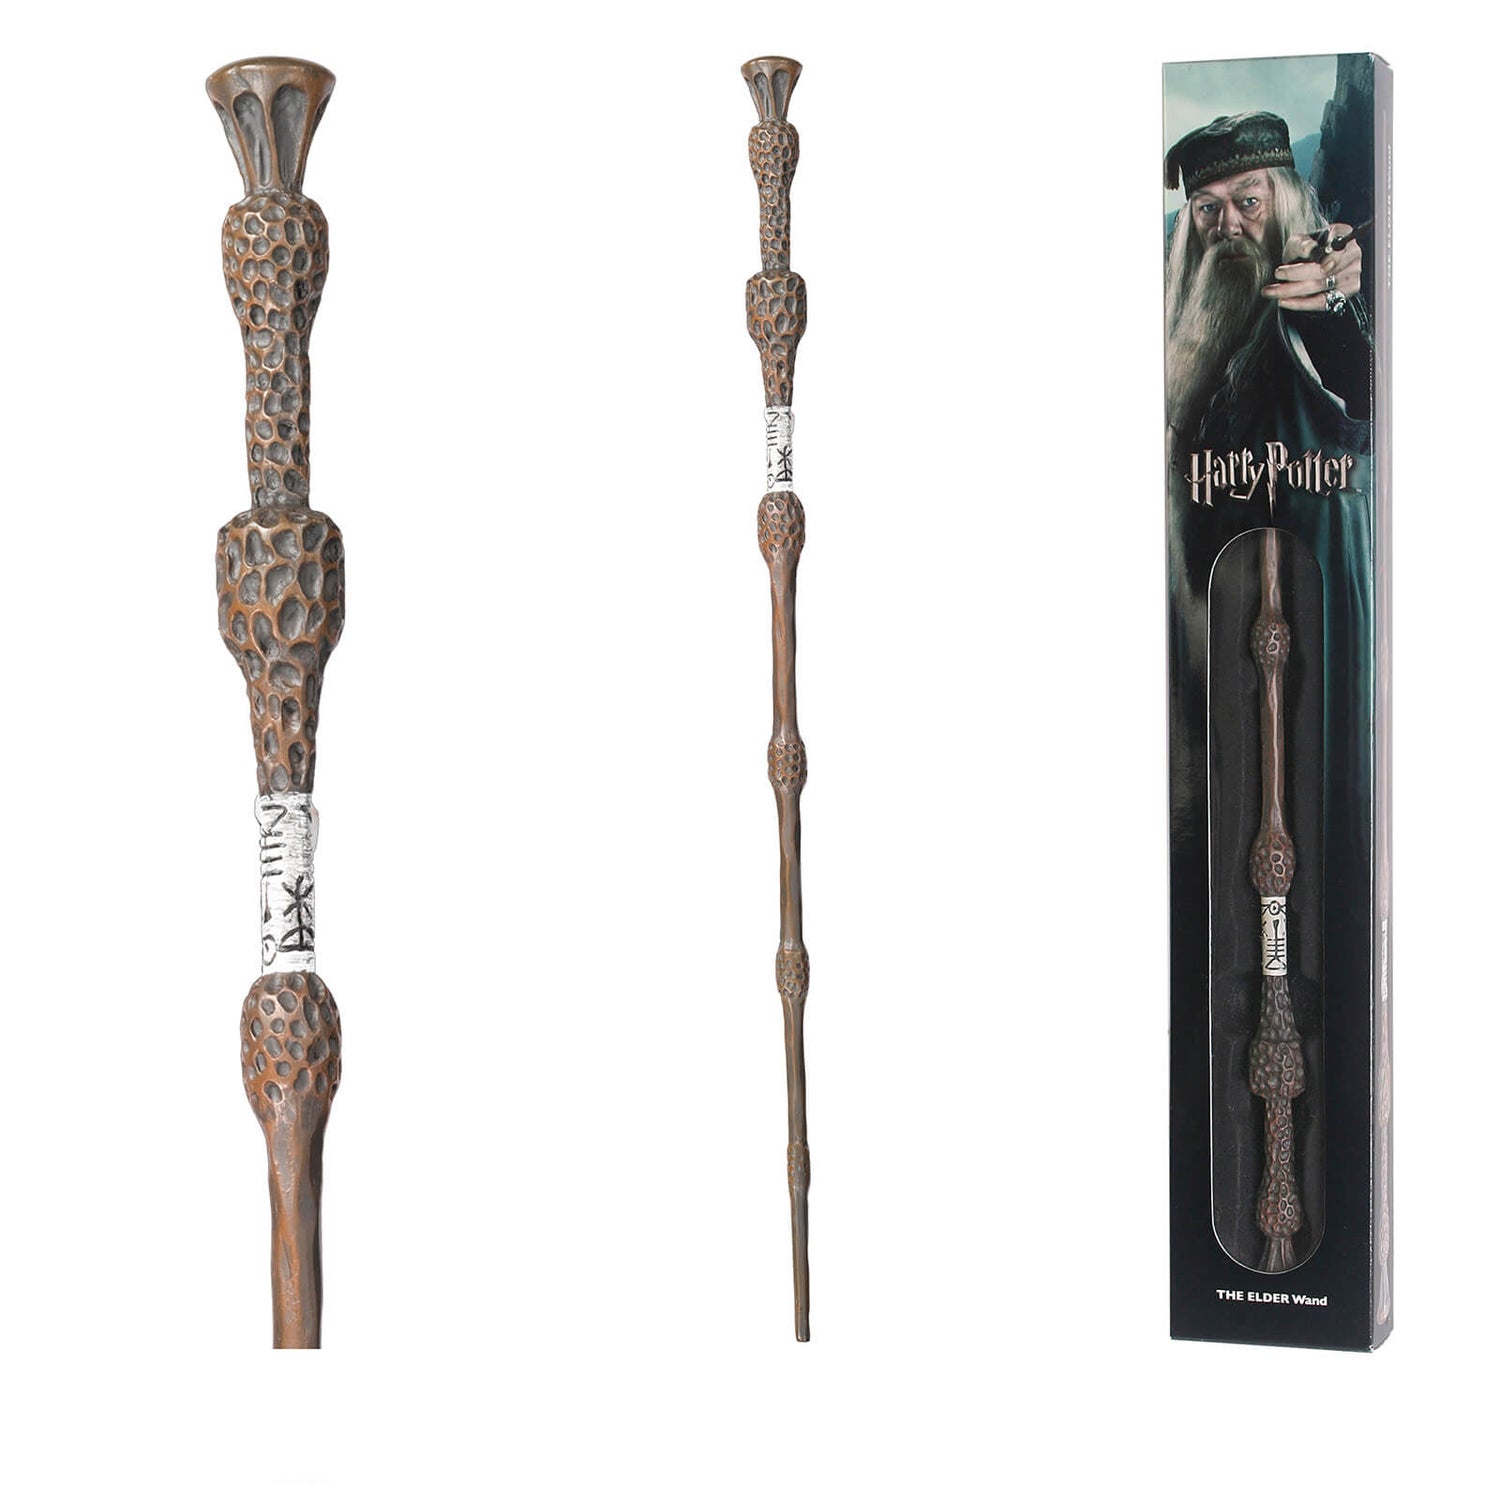 Harry Potter Dumbledores Wand Prop Replica with Window Box - Brown